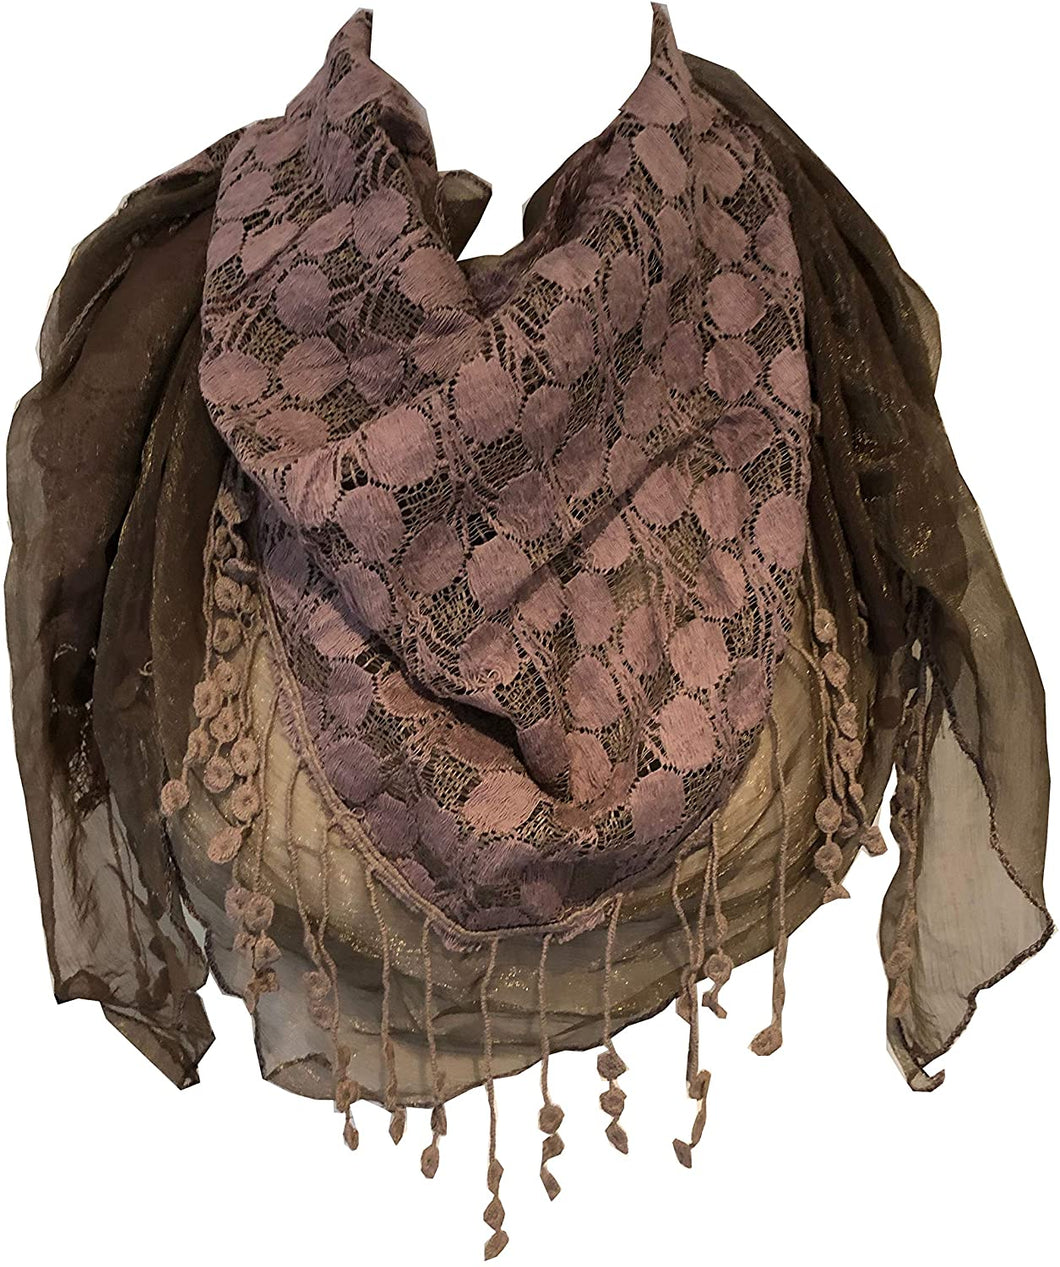 Pamper Yourself Now Brown Circle lace with Chiffon Edge Design Triangle Scarf